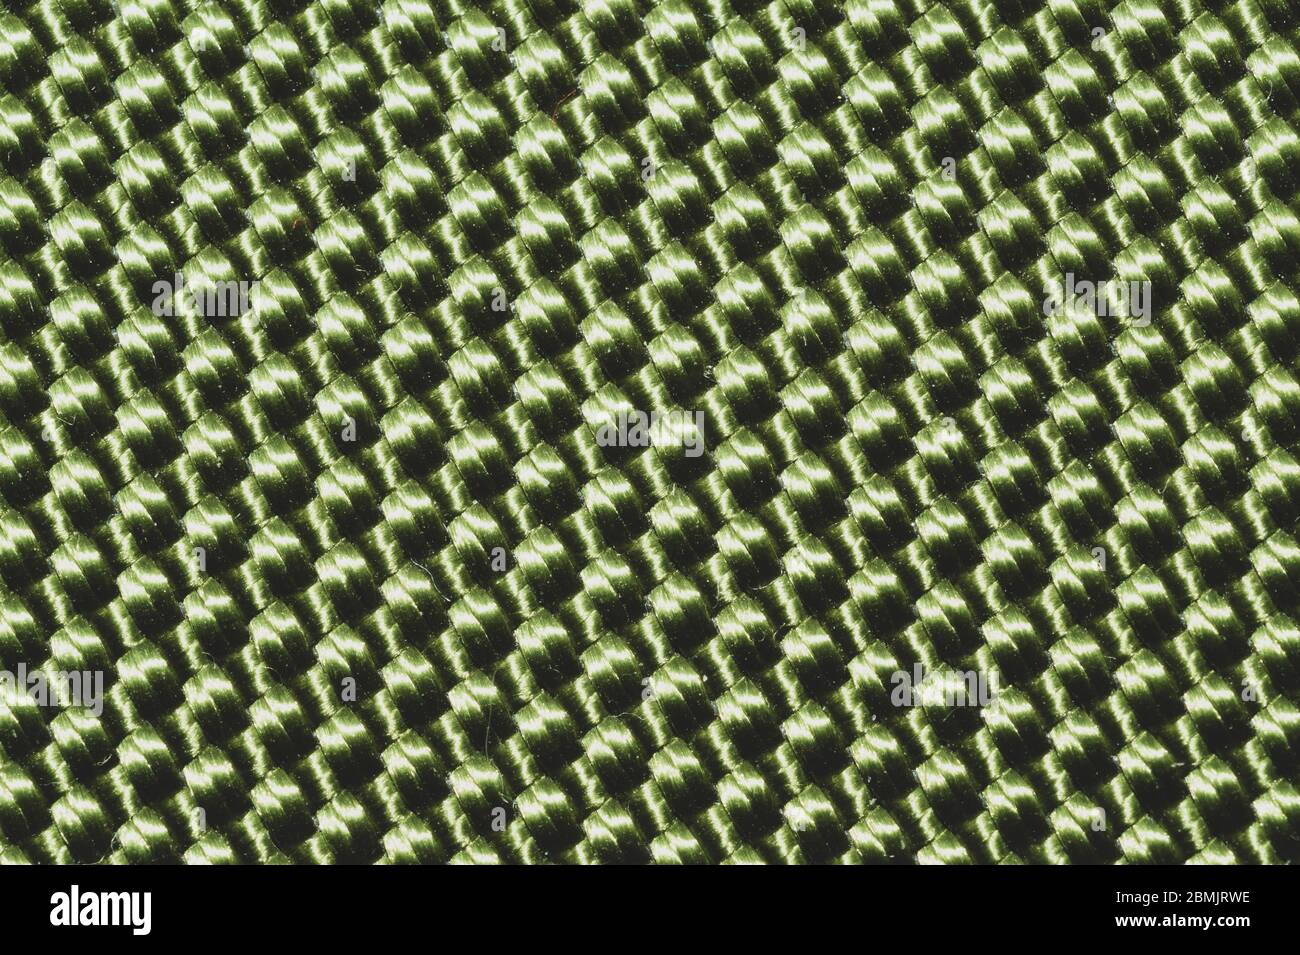 Synthetic fabric texture close up. green braided surface. woven background. stitches of fibers Stock Photo